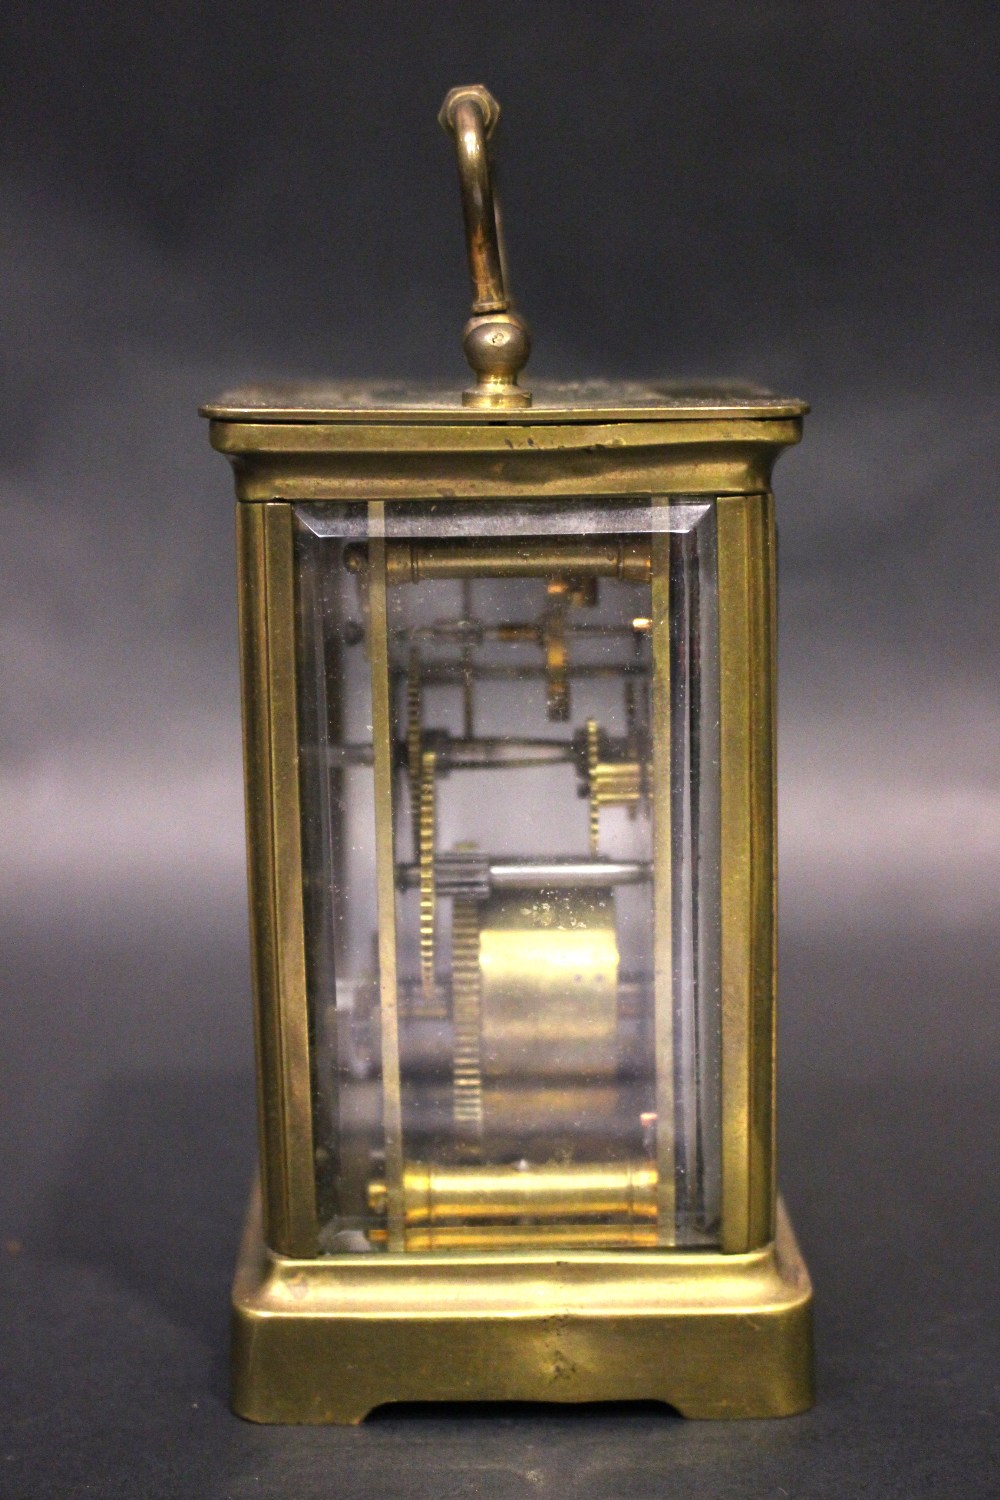 A FRENCH CASH CARRIAGE CLOCK, brass frame, bevelled glass on all sides, 5" x 4" x 3.5" approx case - Image 5 of 7